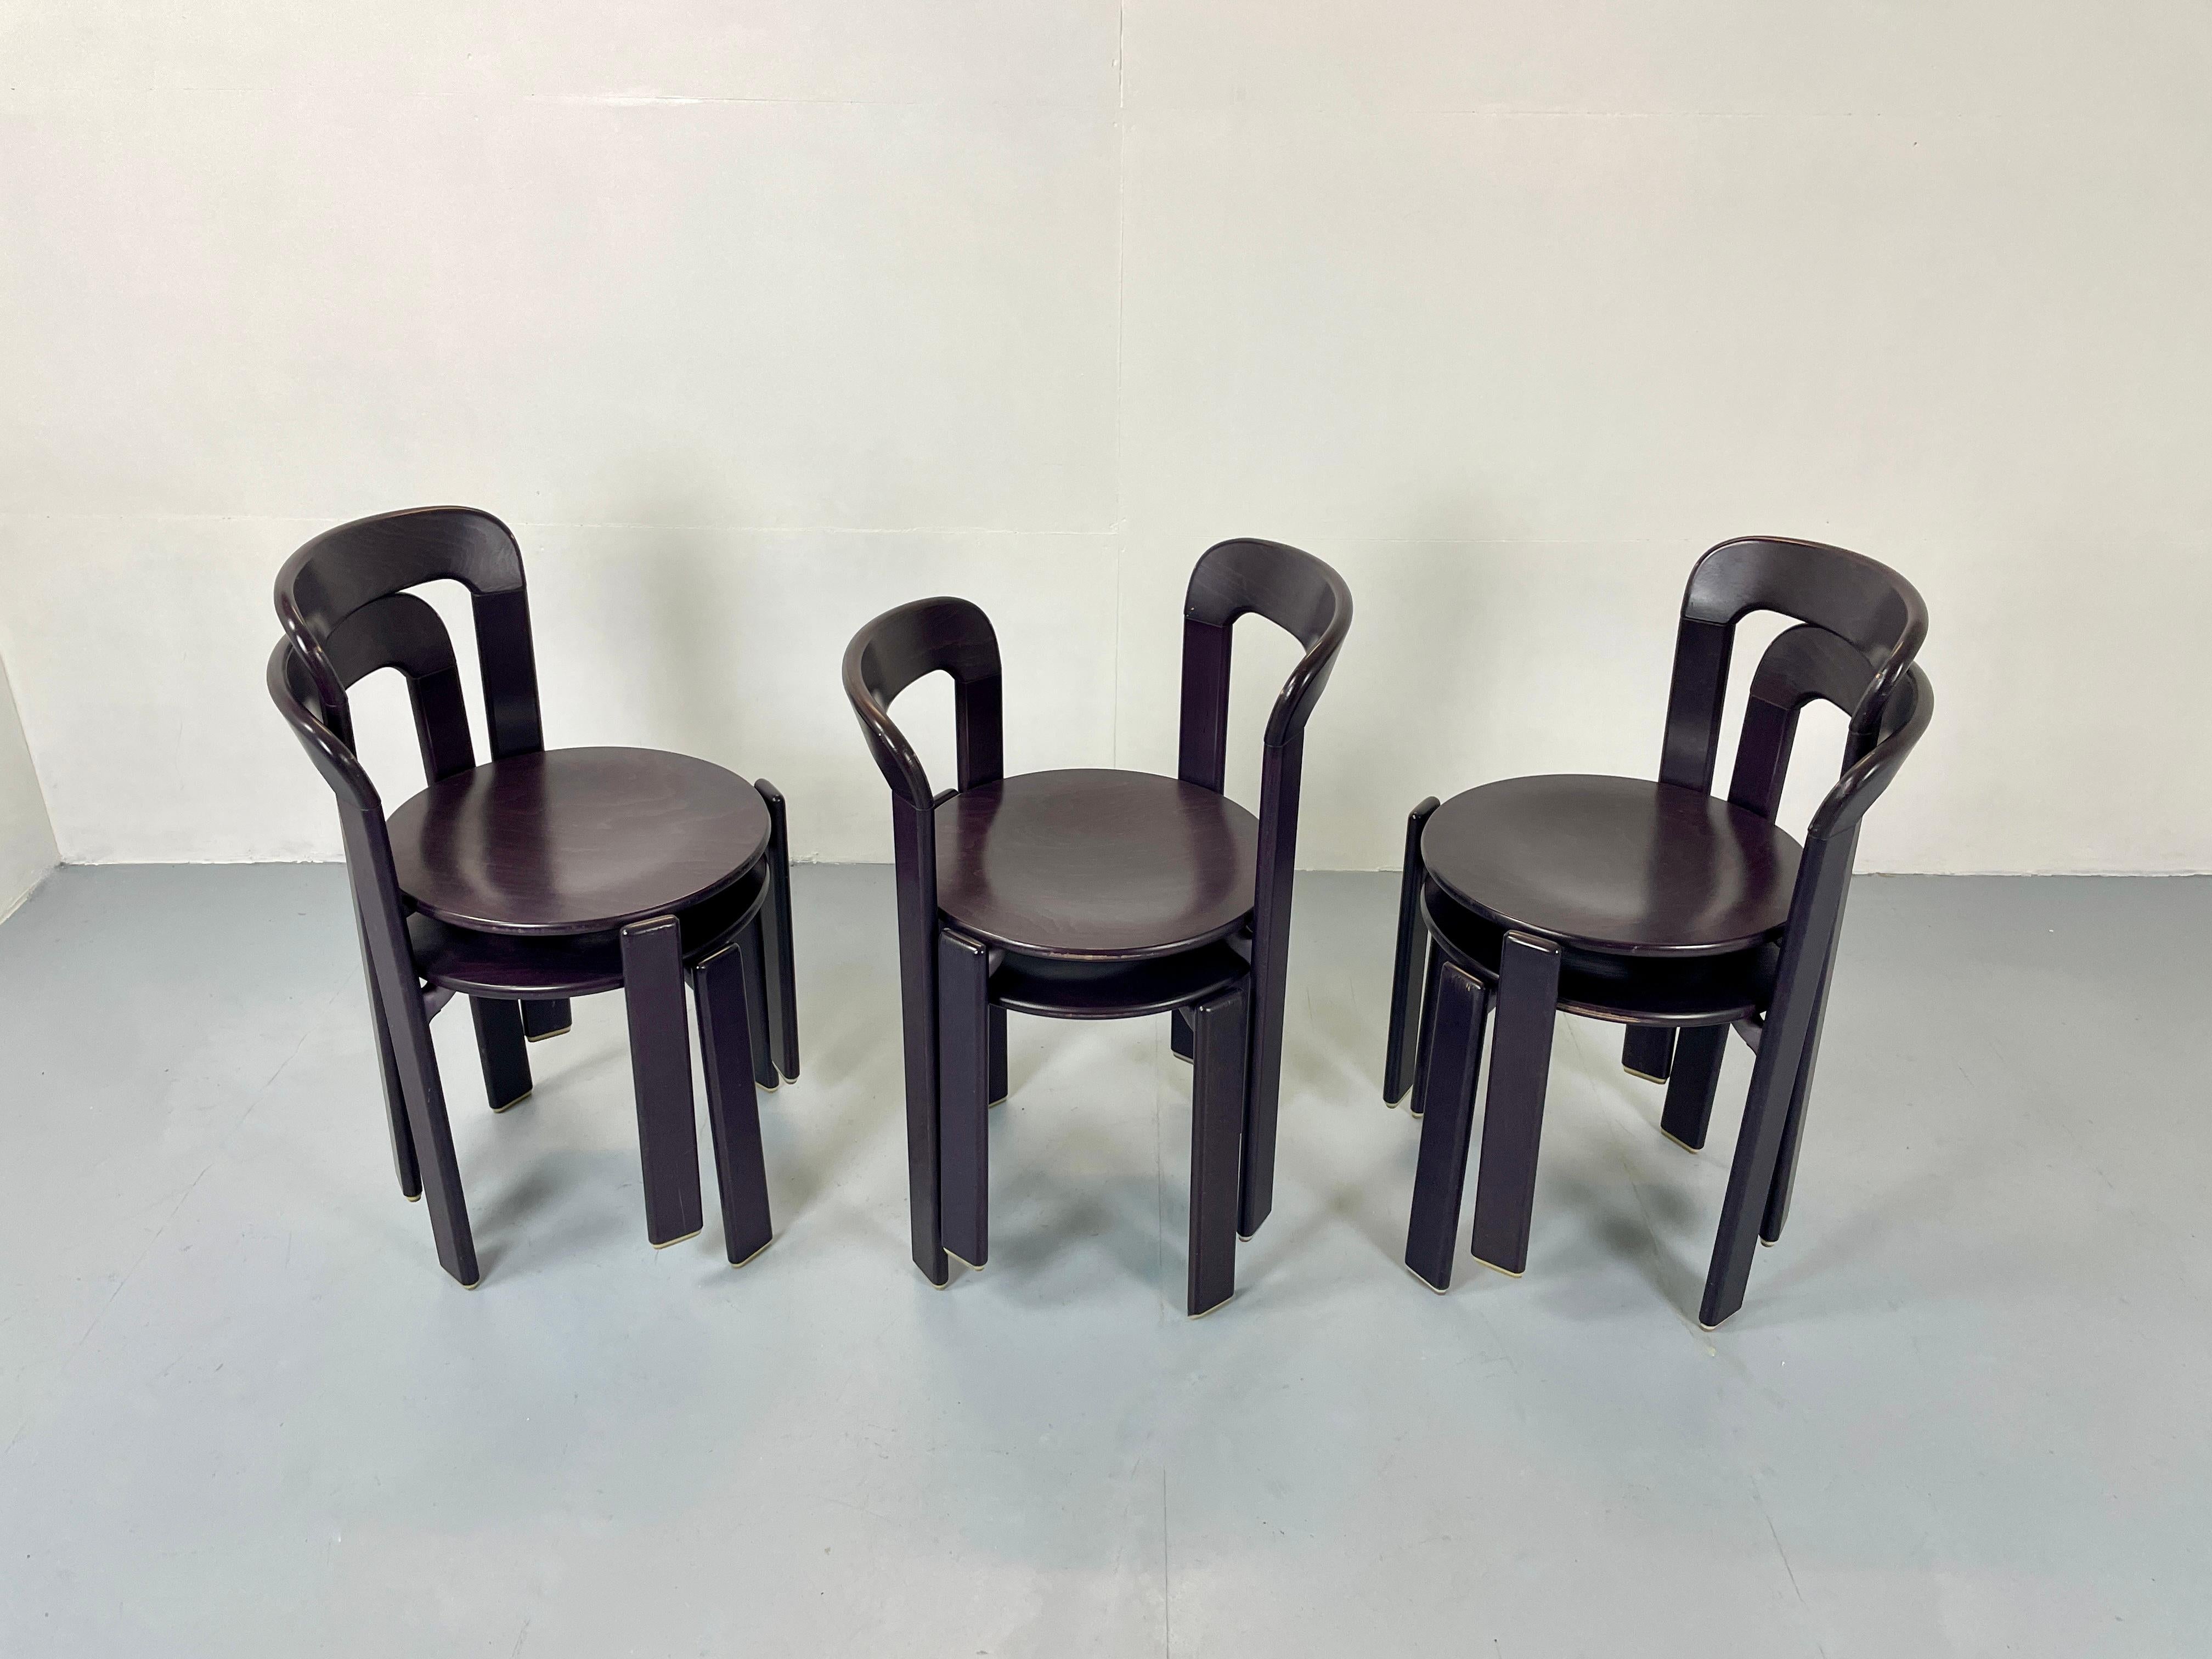 Beech Vintage Bruno Rey Chairs by Kusch Co. in Eggplant / Violett, 1970s